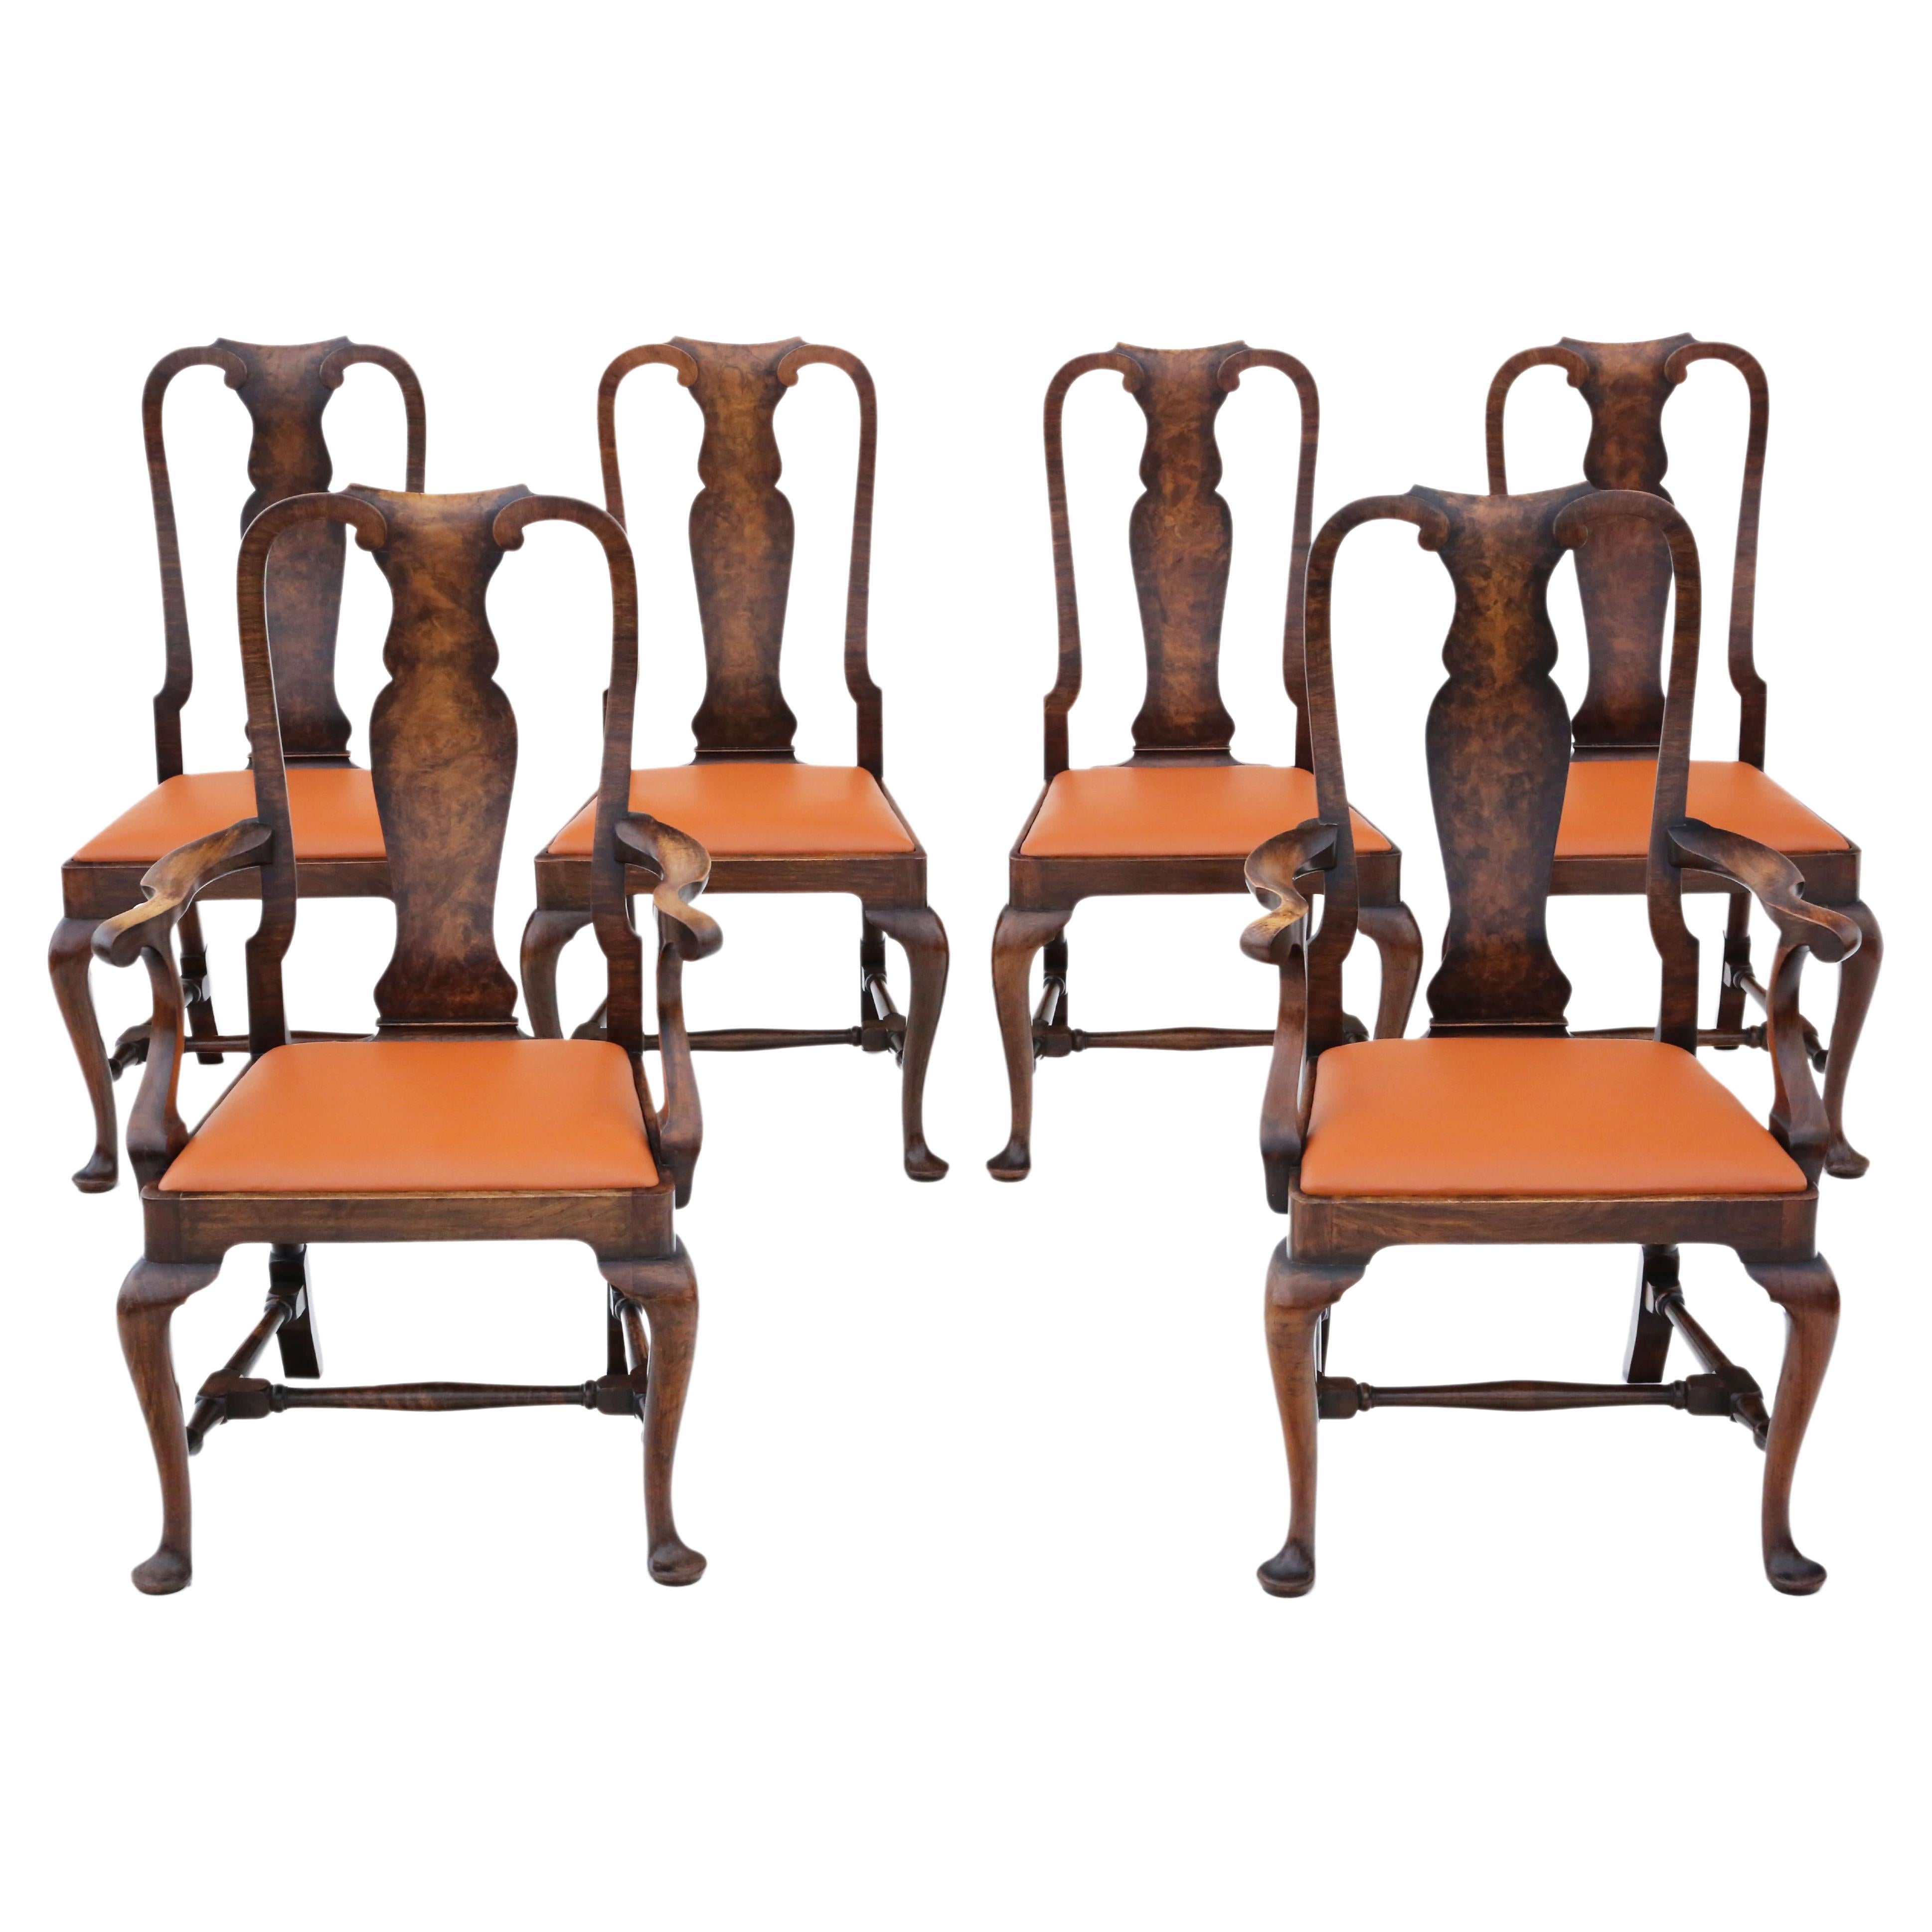 Antique Fine Quality Set of 6 Queen Anne Revival Burr Walnut Dining Chairs c1910